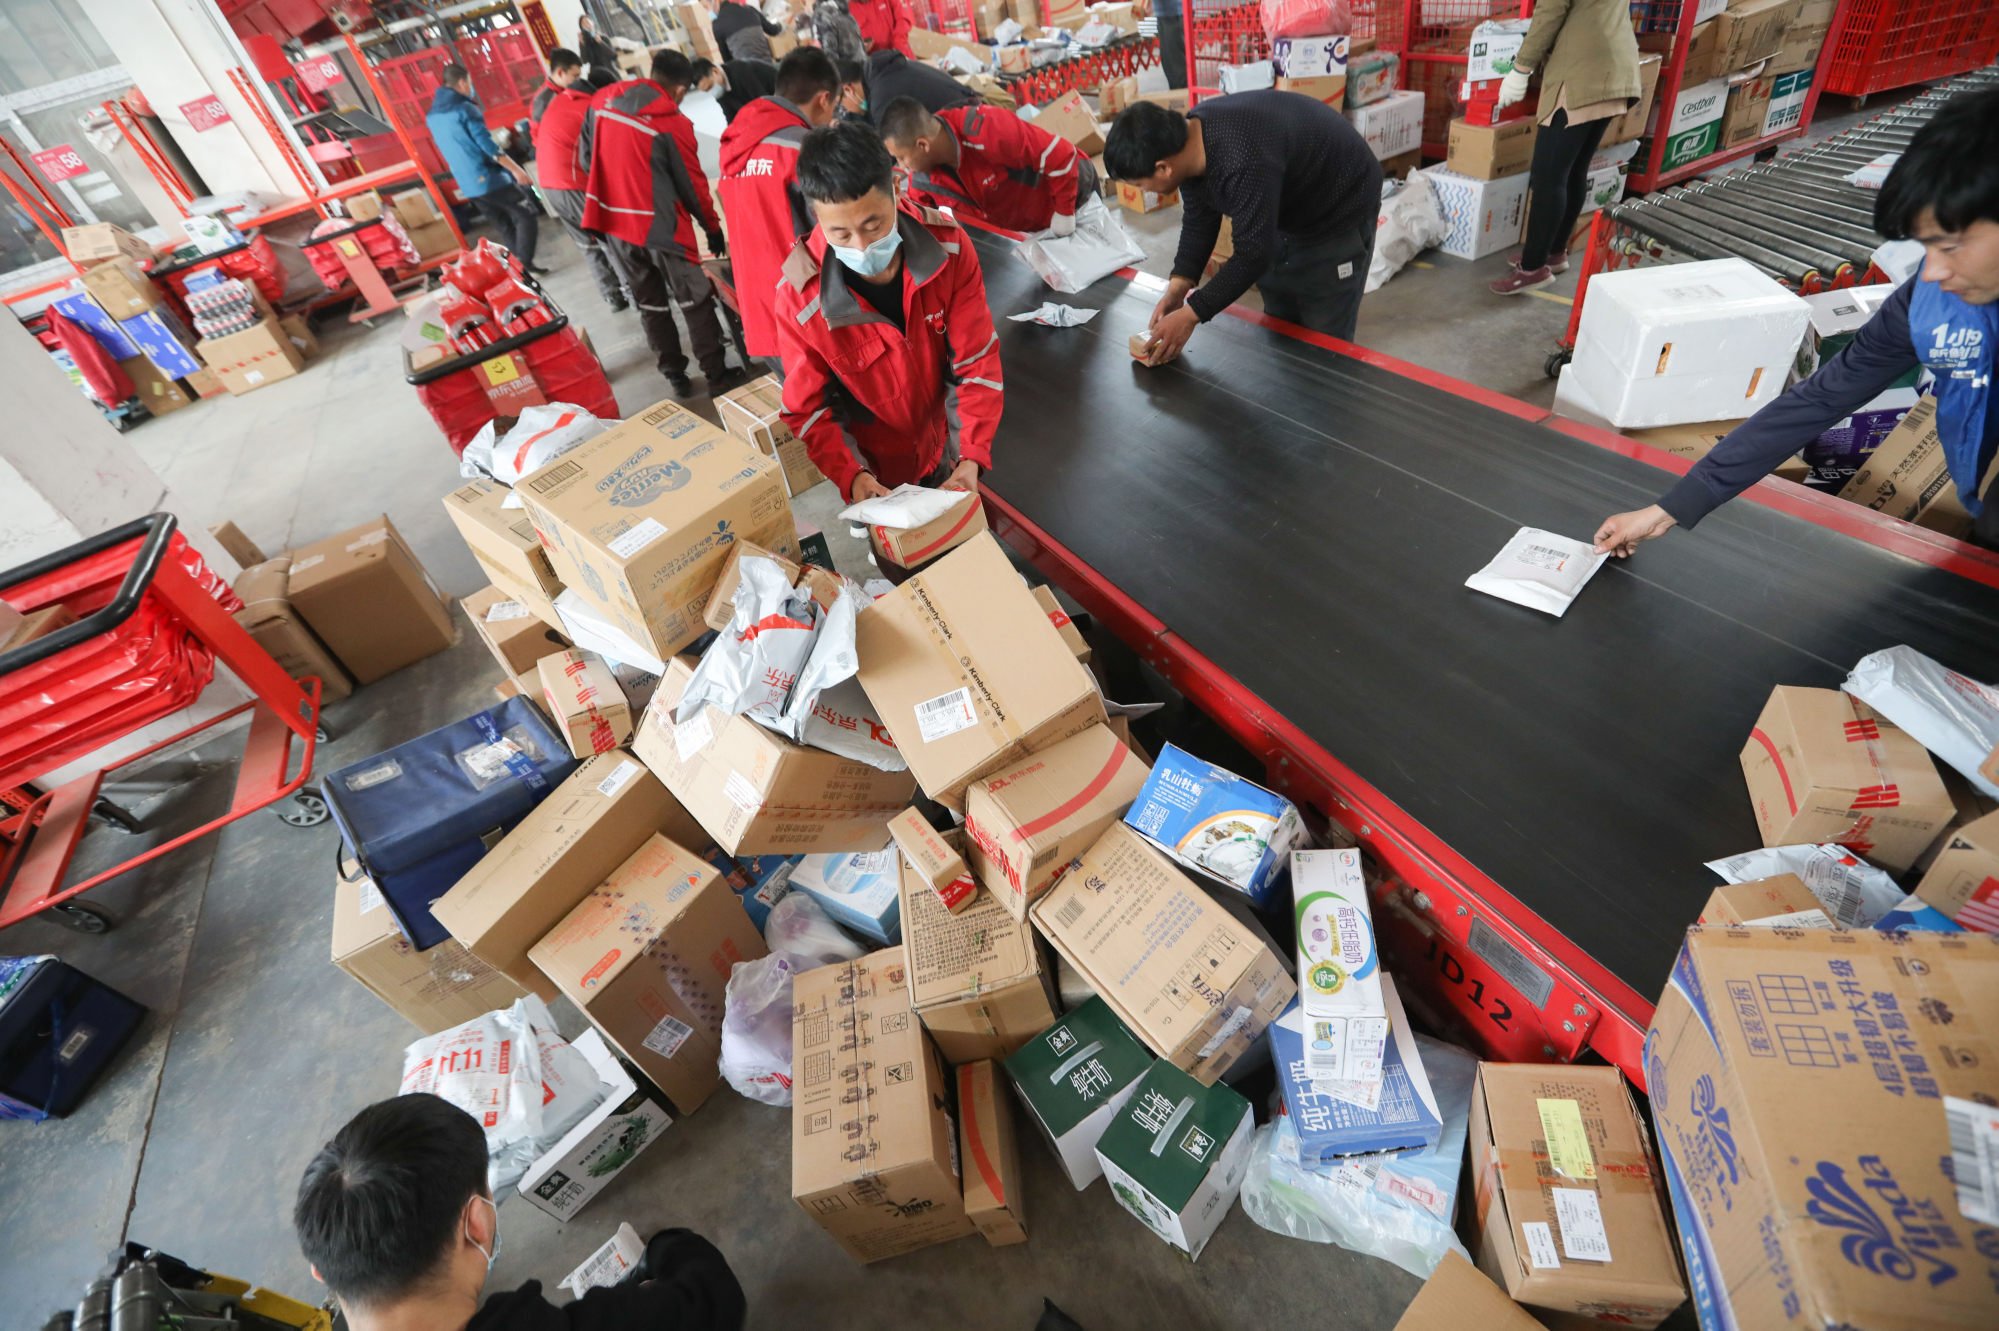 Workers sort out packages for delivery at a JD.com delivery station in Beijing, China, on November 11, 2020. Photo: Simon Song